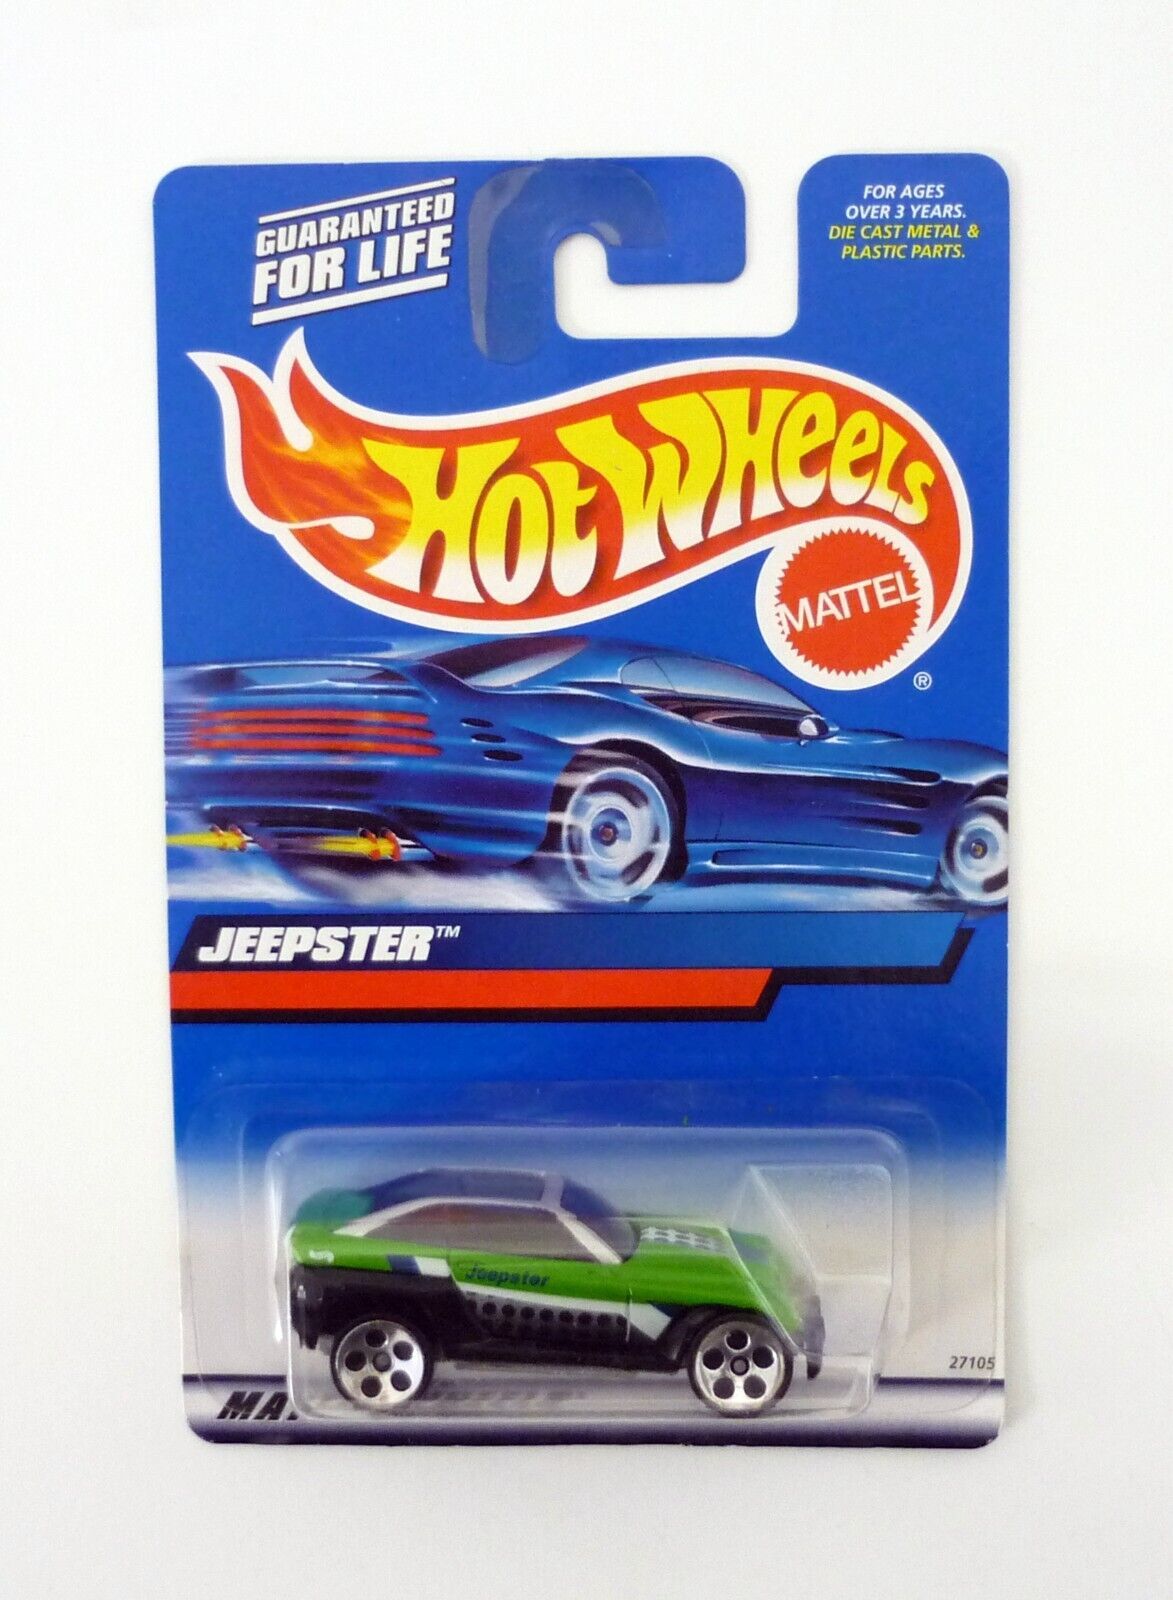 Primary image for Hot Wheels Jeepster #140 Green Die-Cast Car 2000